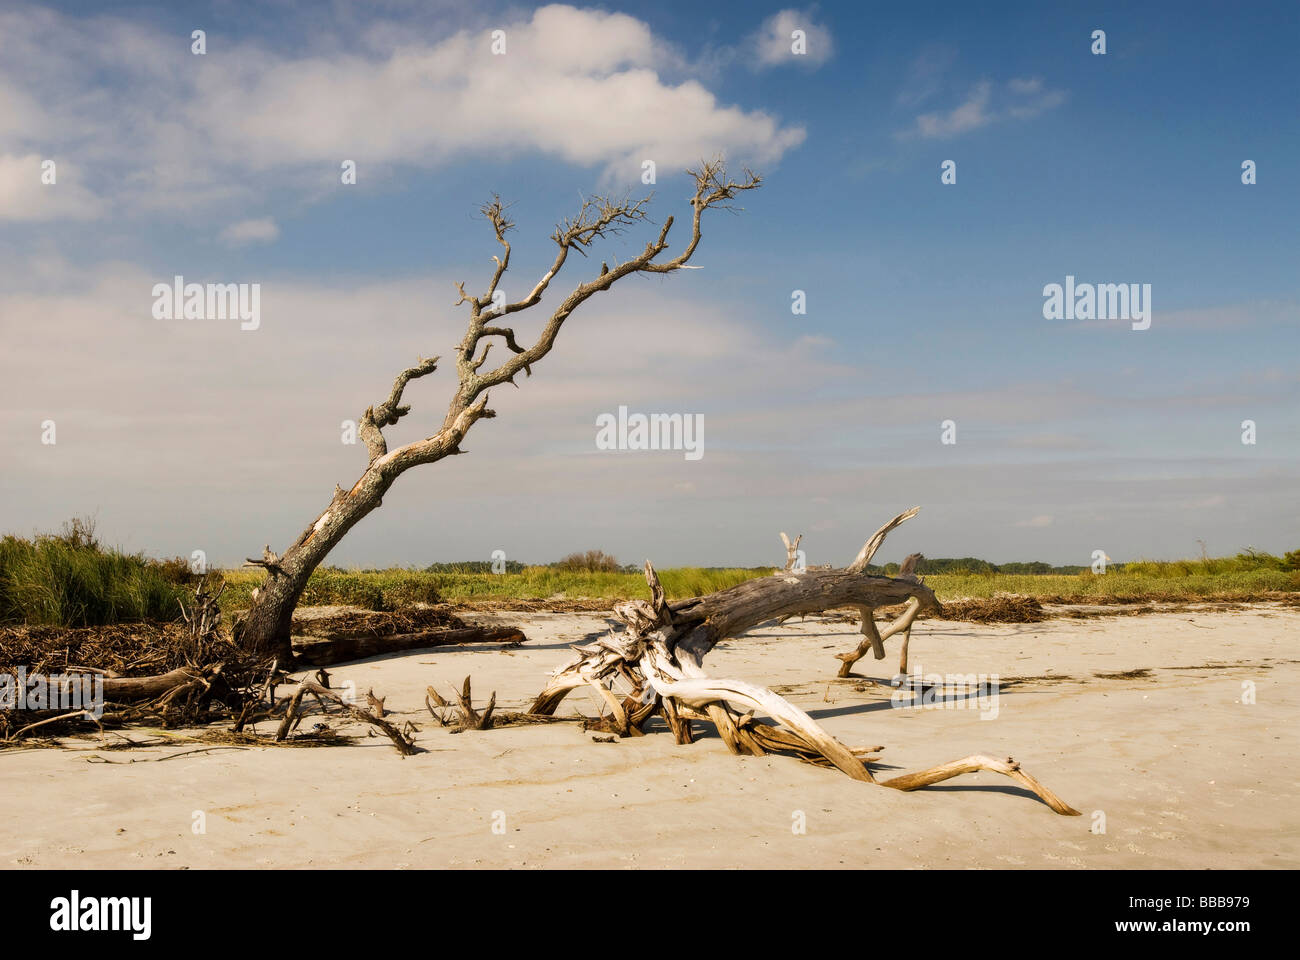 Driftwood on beach Banque D'Images